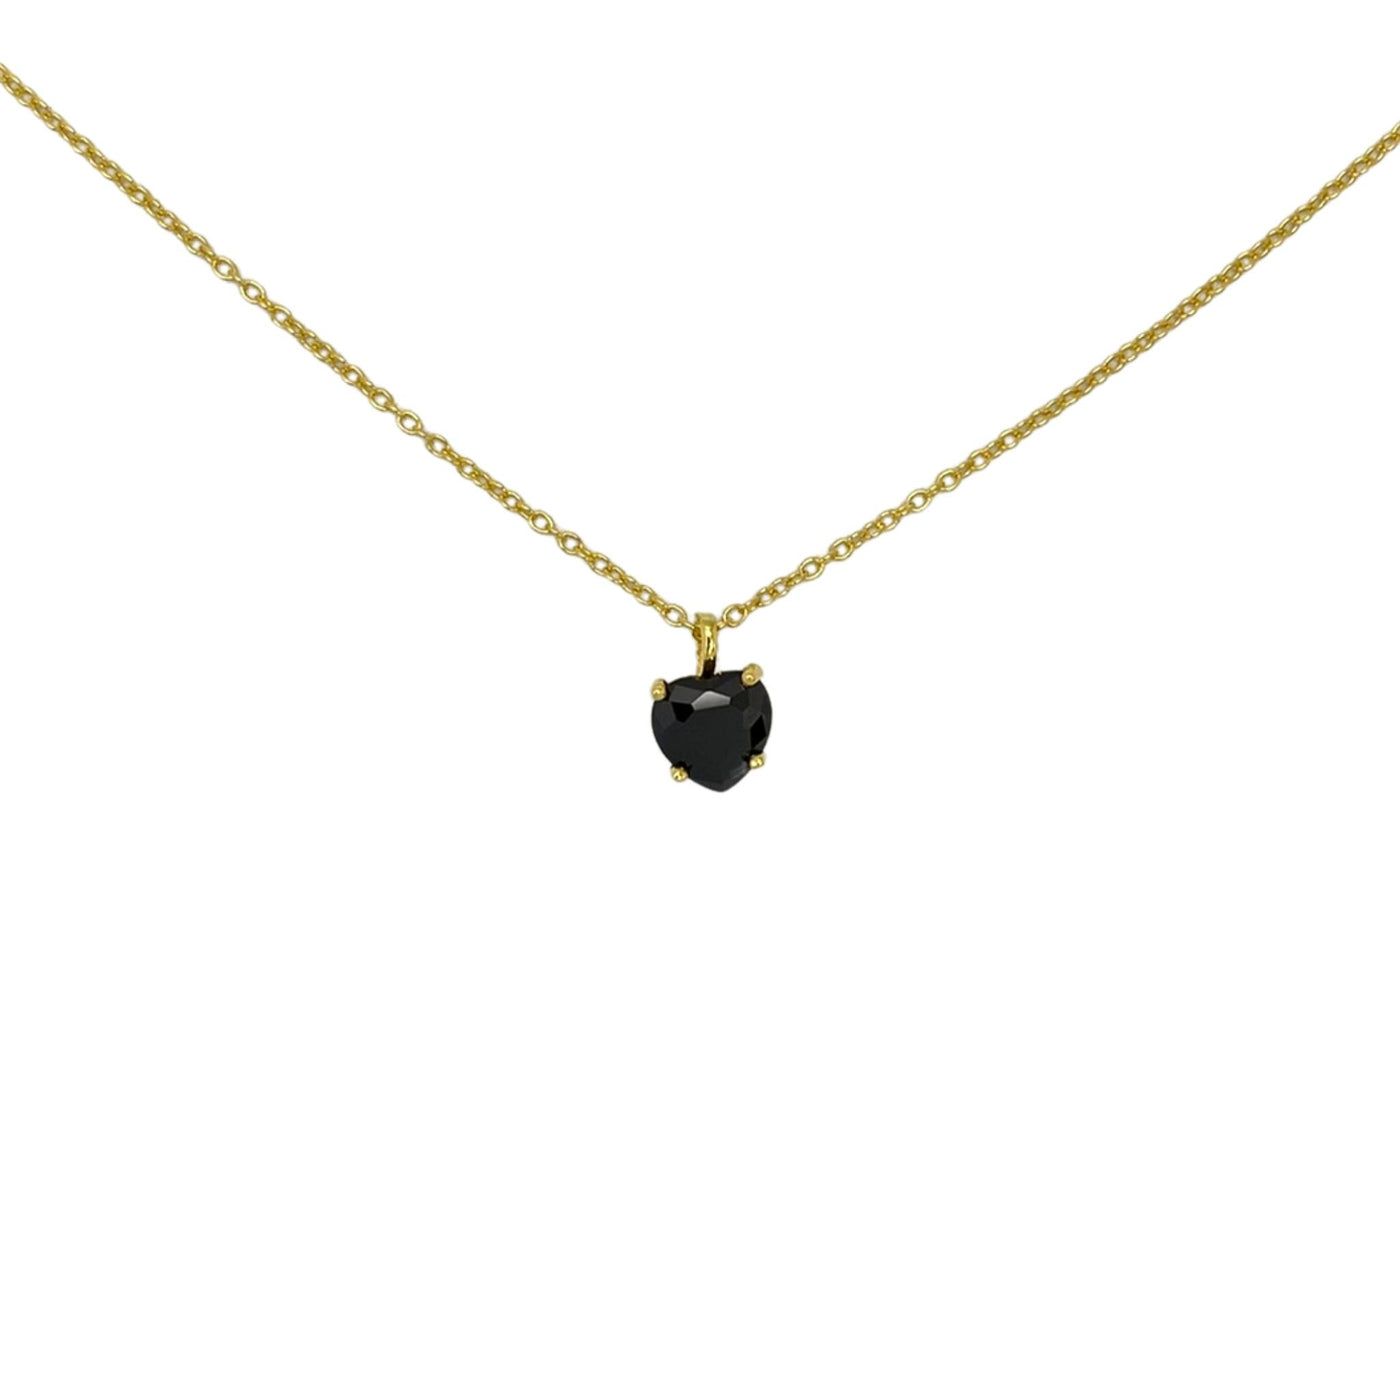 Silver necklace with heart charm - yellow - 7 mm